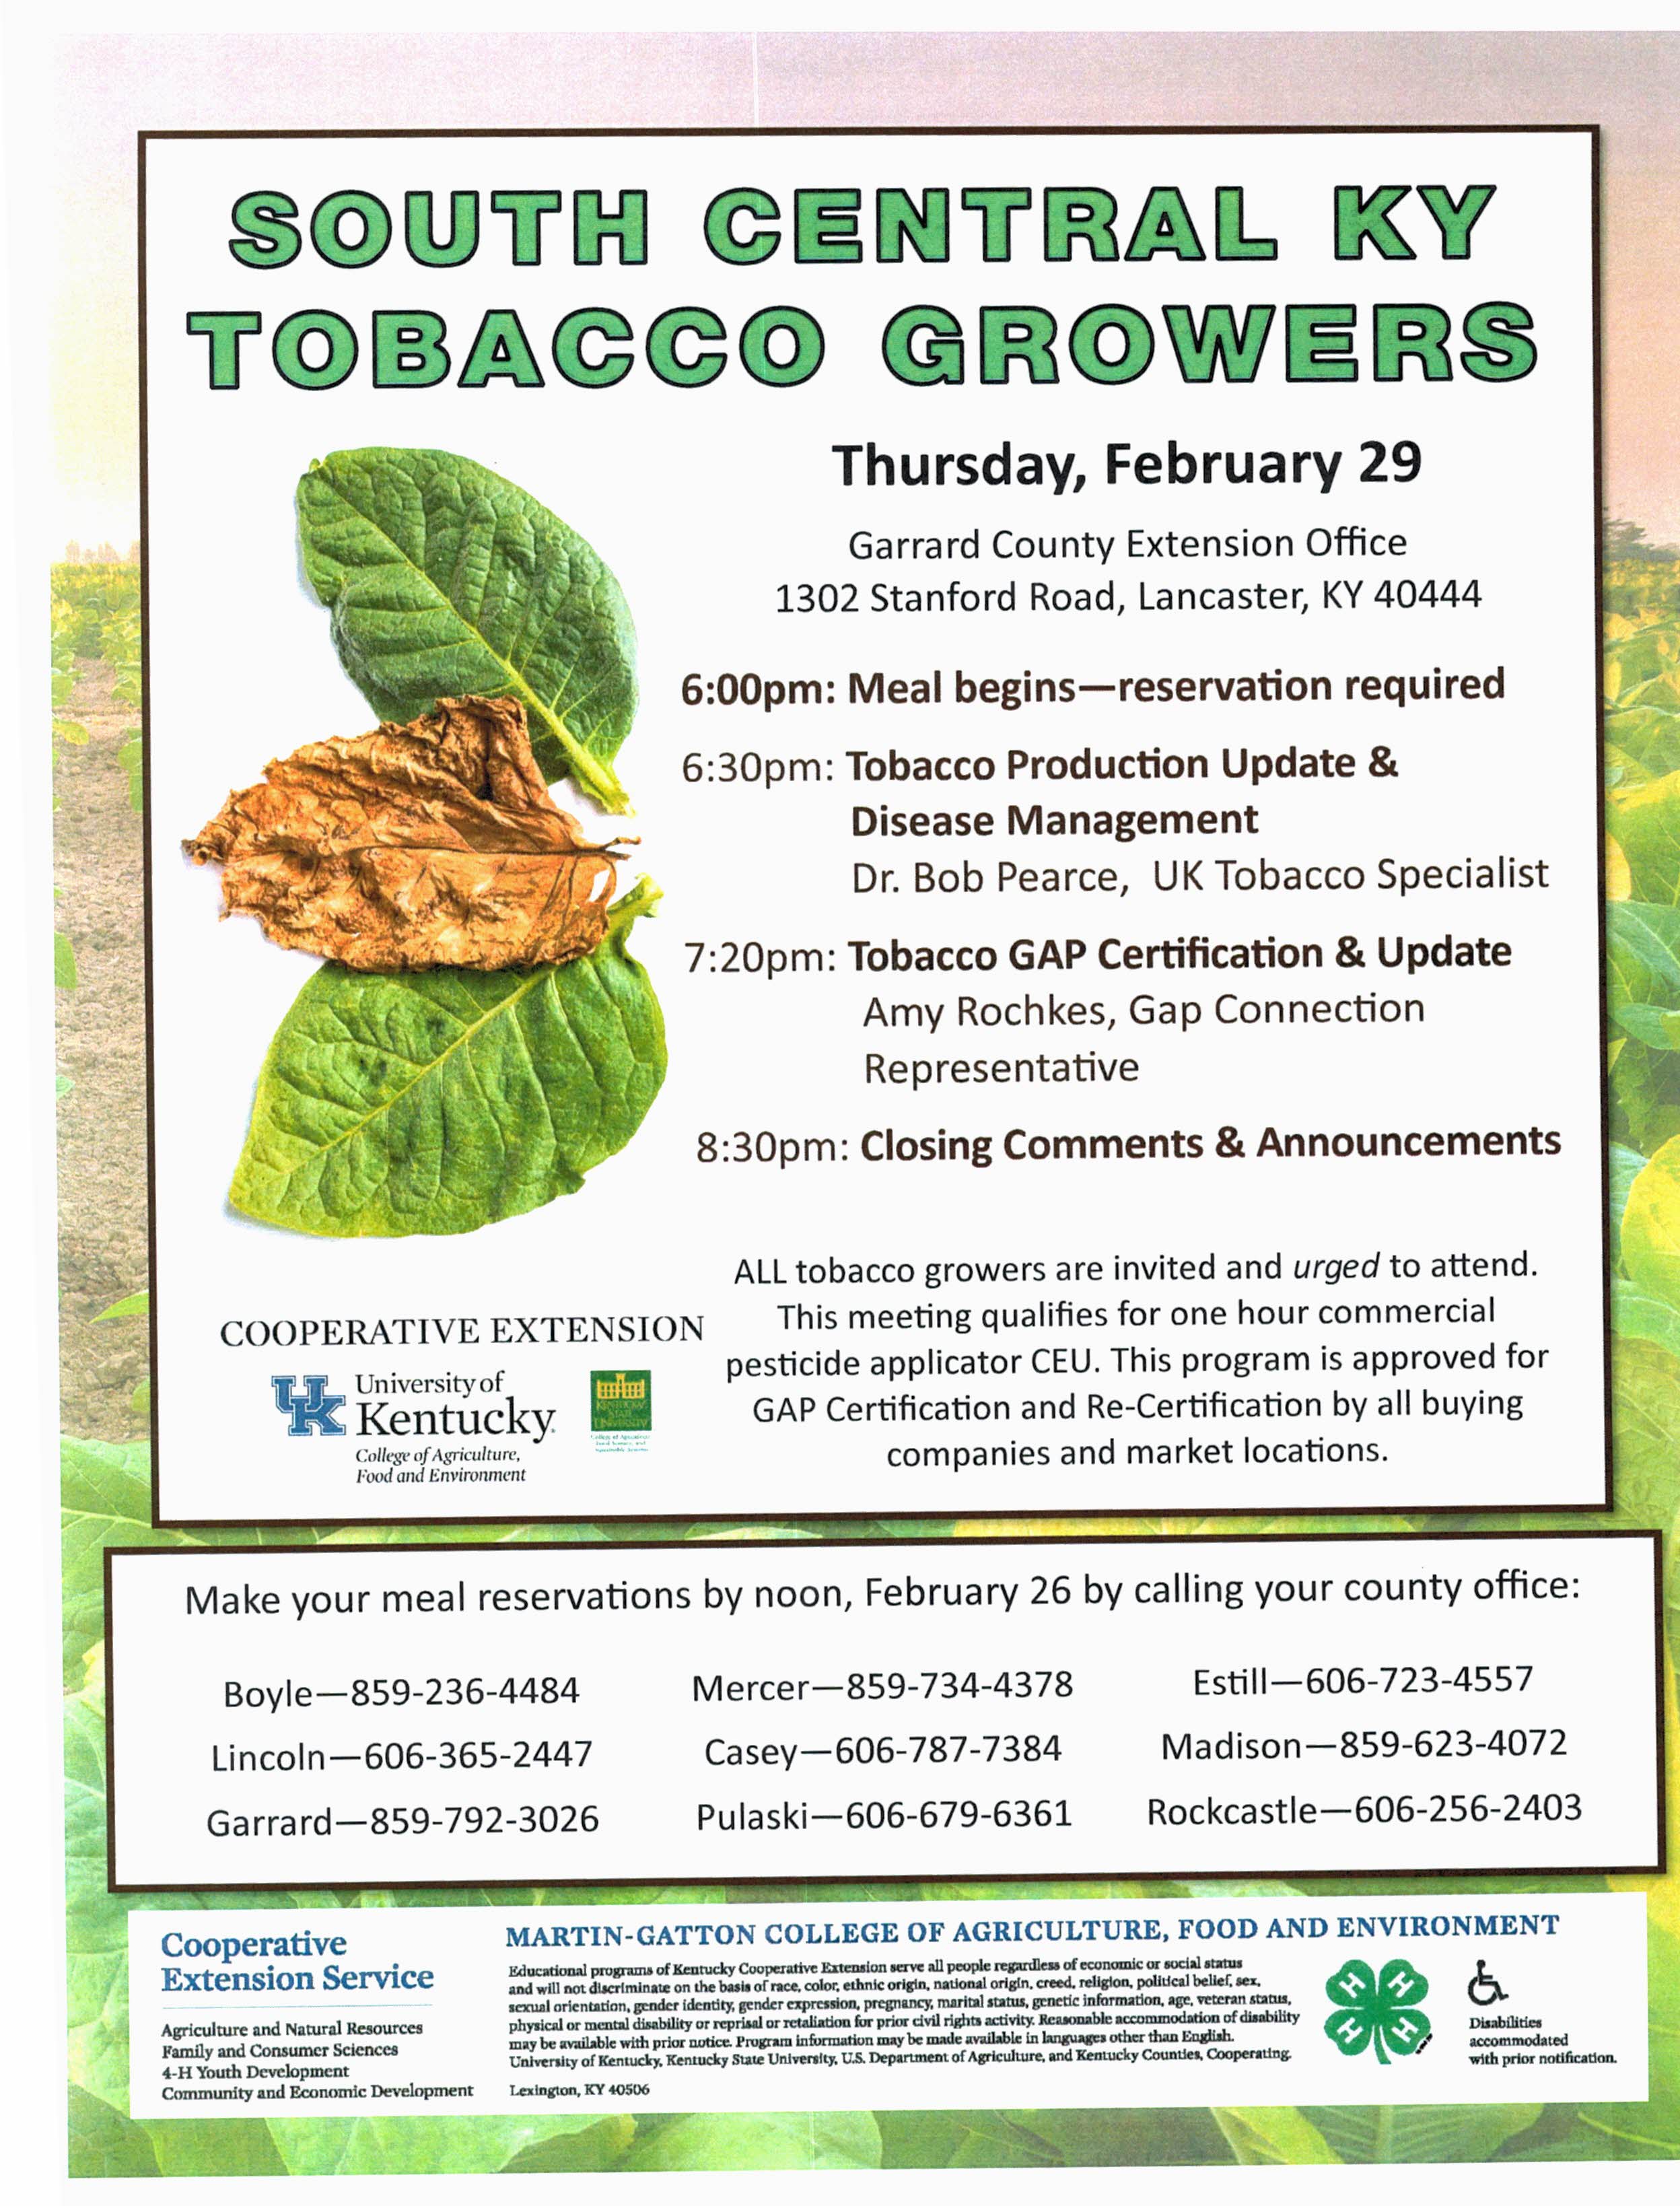 South Central KY Tobacco Growers